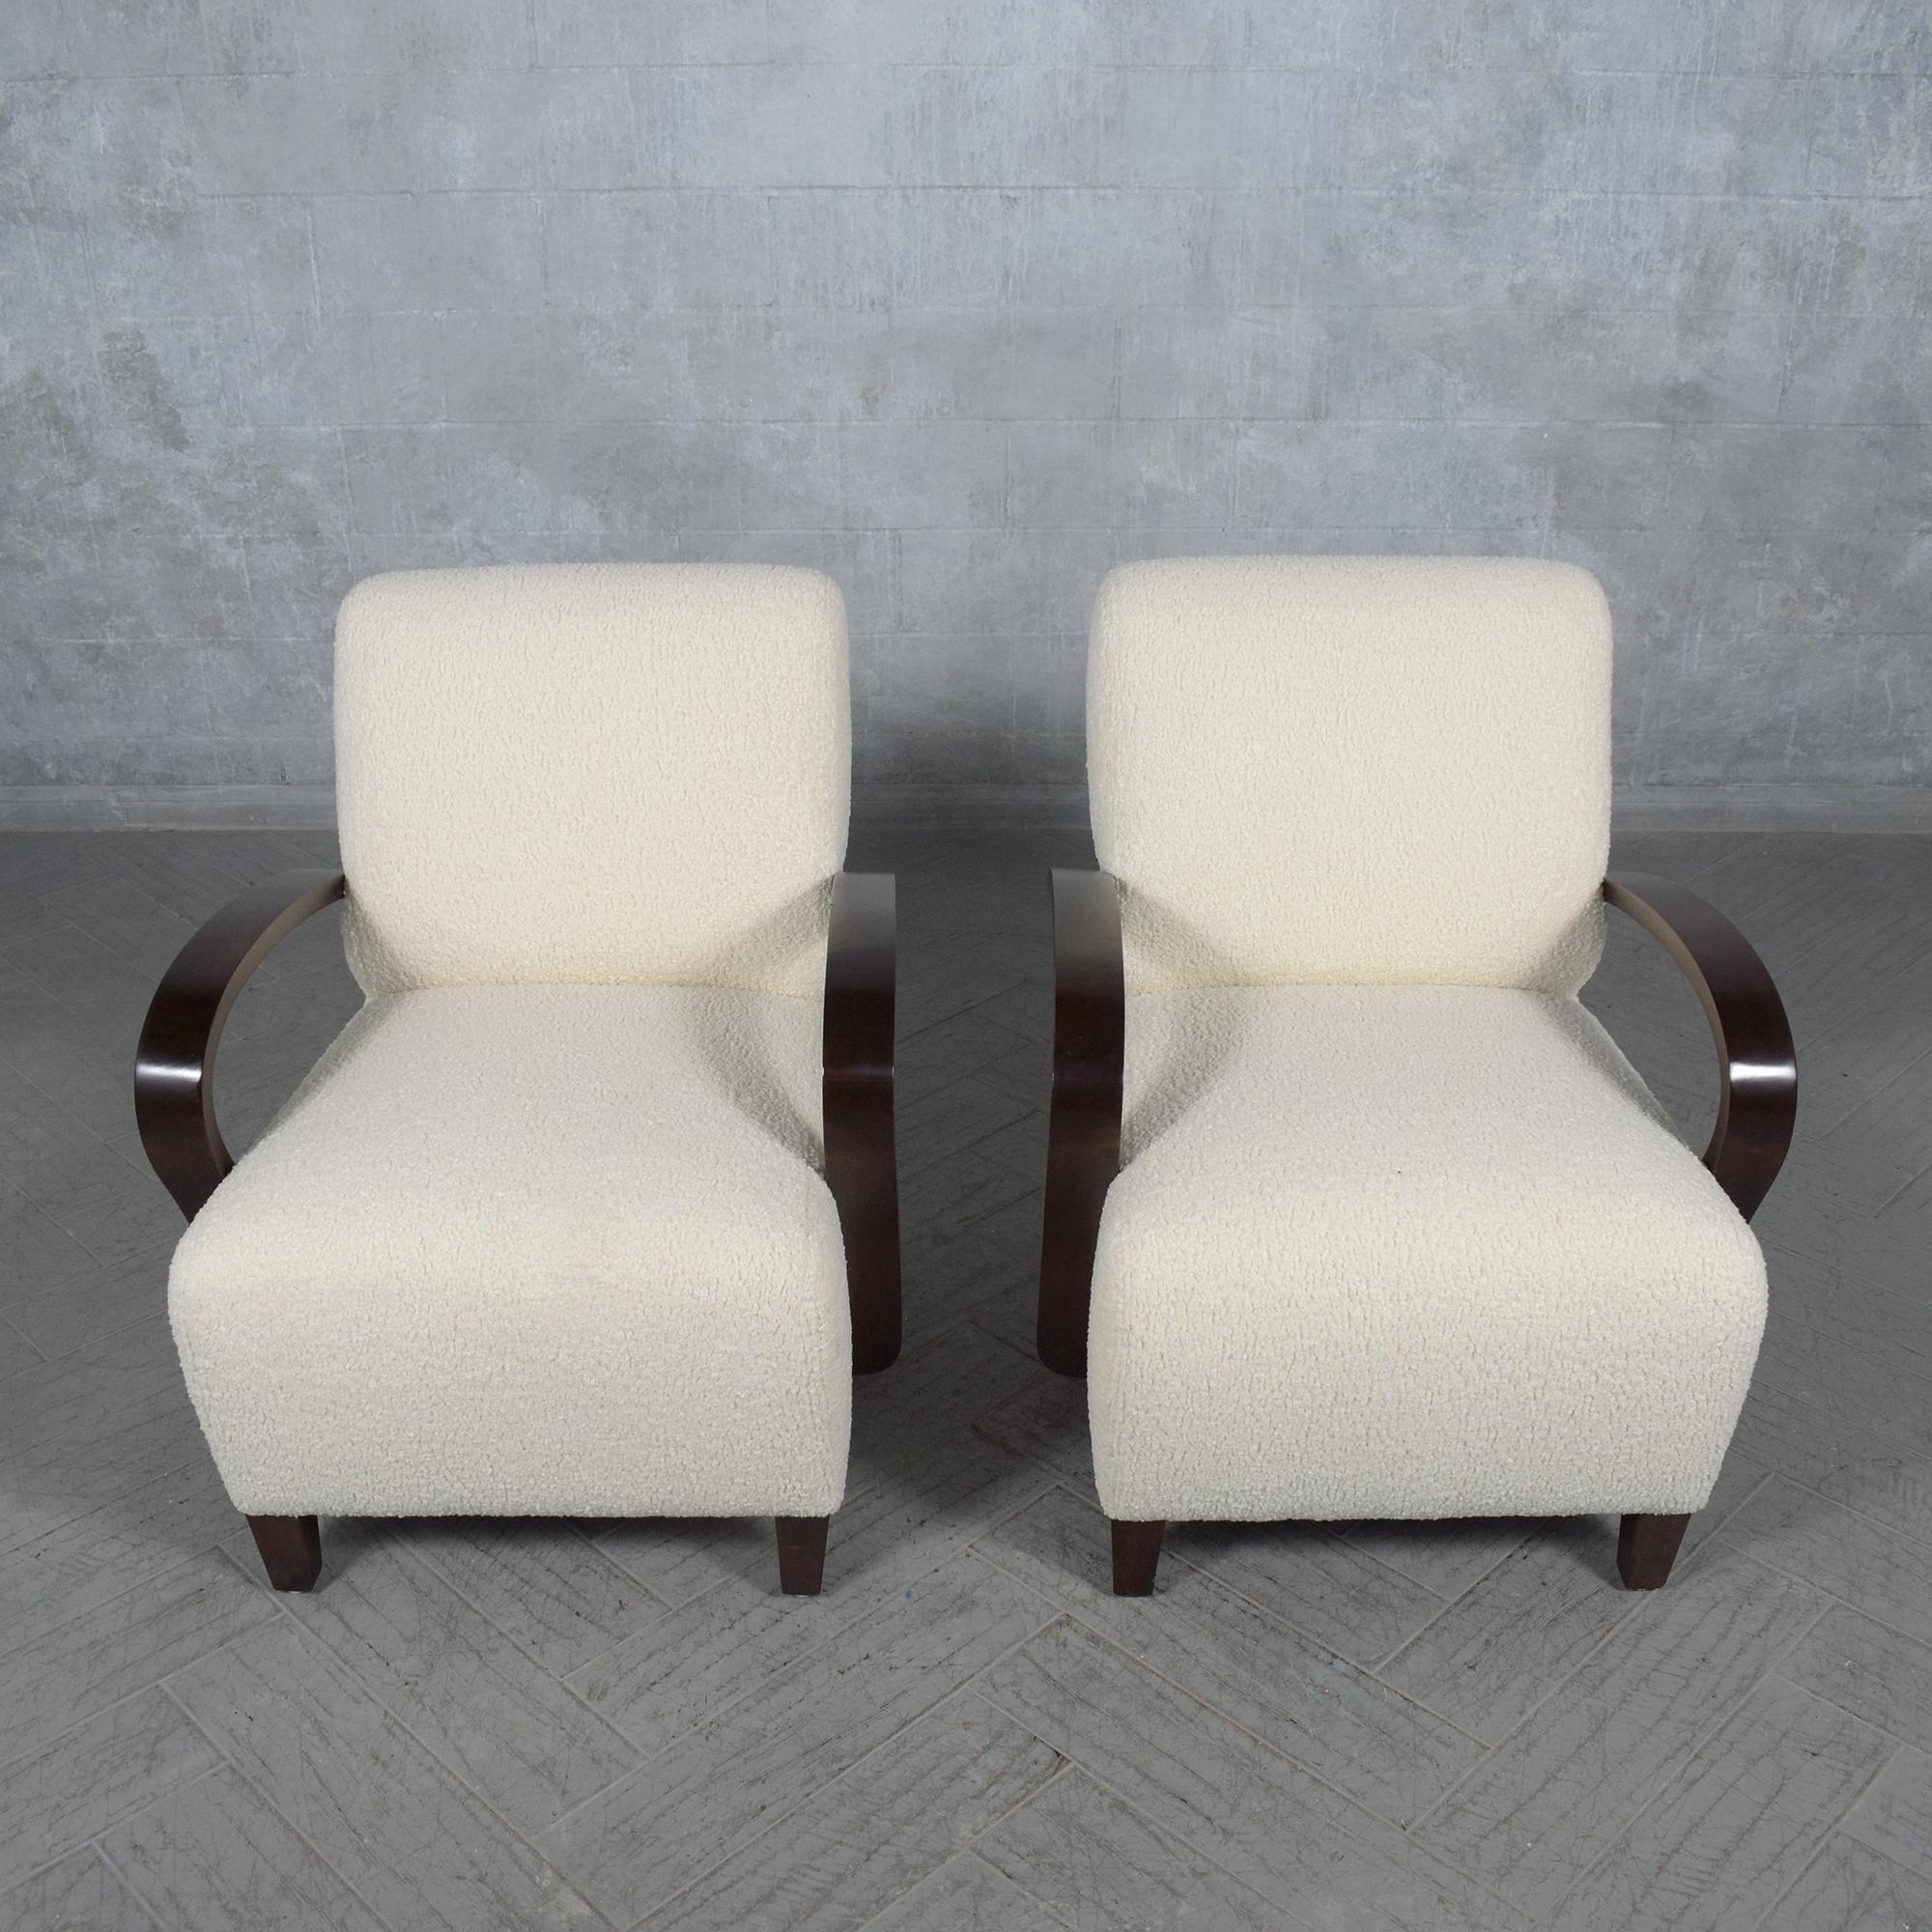 Delight in the fusion of classic style and modern comfort with our vintage pair of mid-century modern lounge chairs, thoughtfully restored by our skilled craftsmen. These chairs are reimagined to suit contemporary lifestyles while retaining their